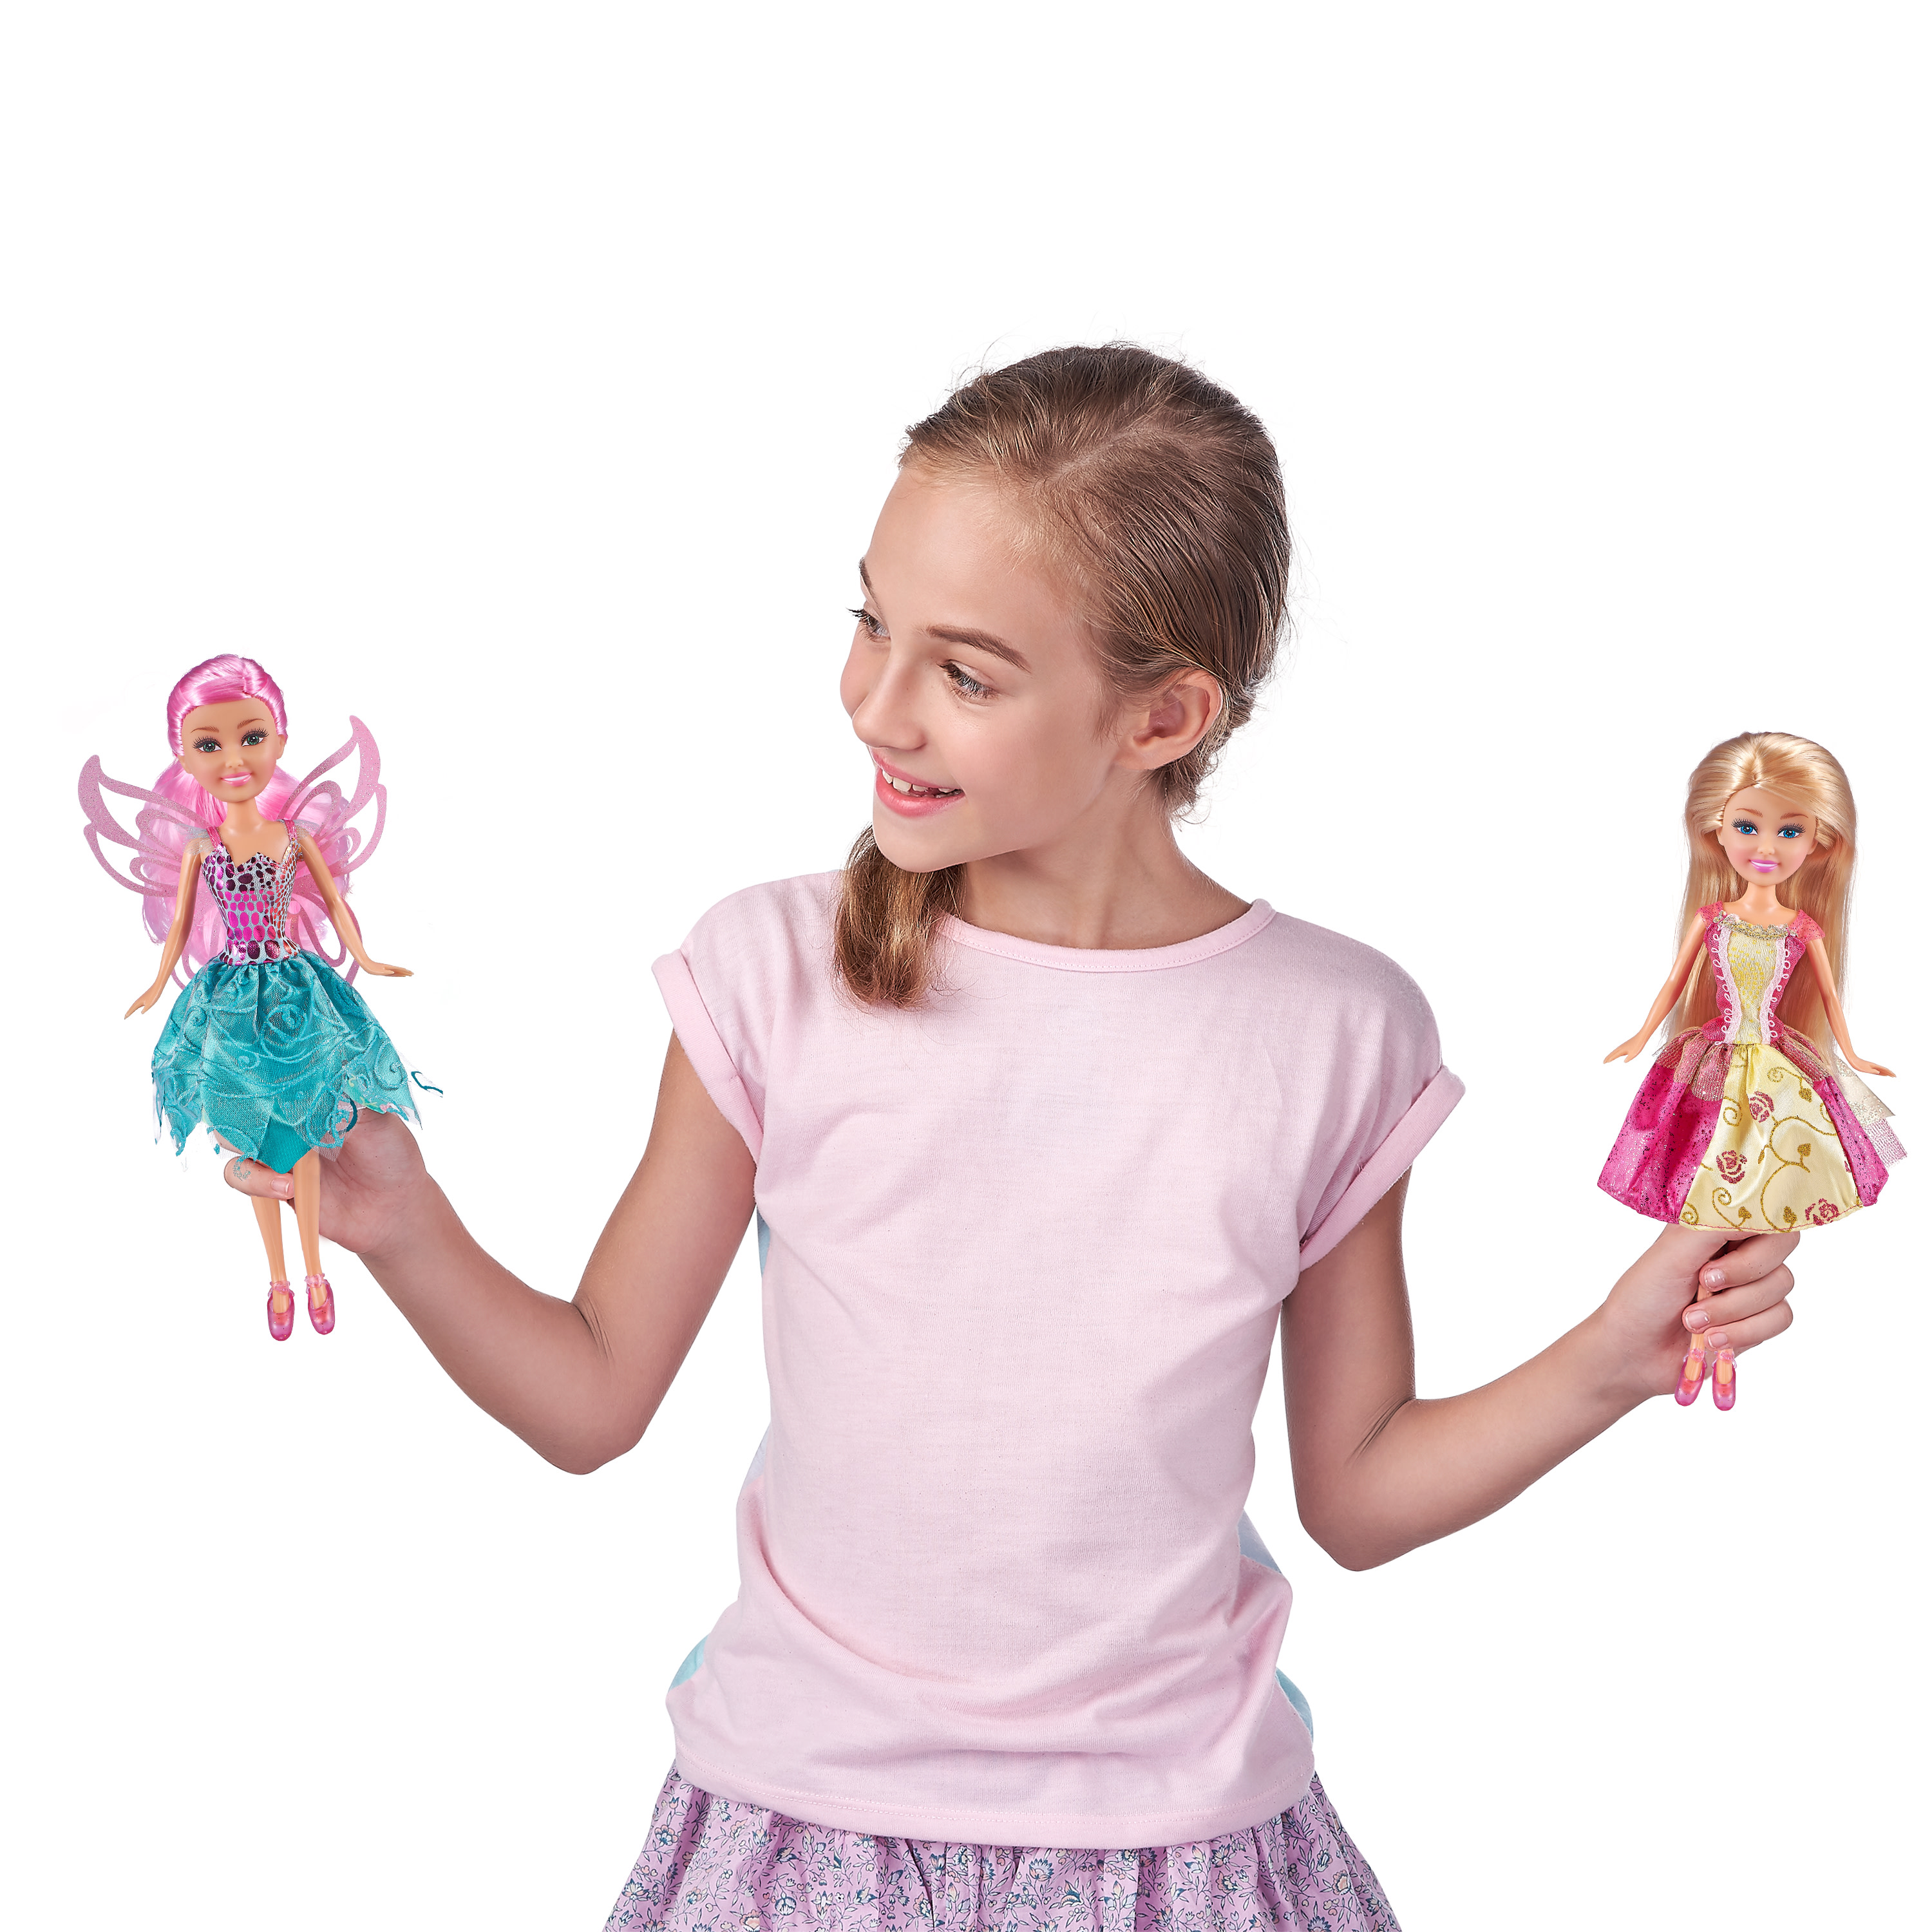 Sparkle Girlz Mini Cone Doll 10.5" Height Pink by Zuru Ages 3 - 99 - image 2 of 6